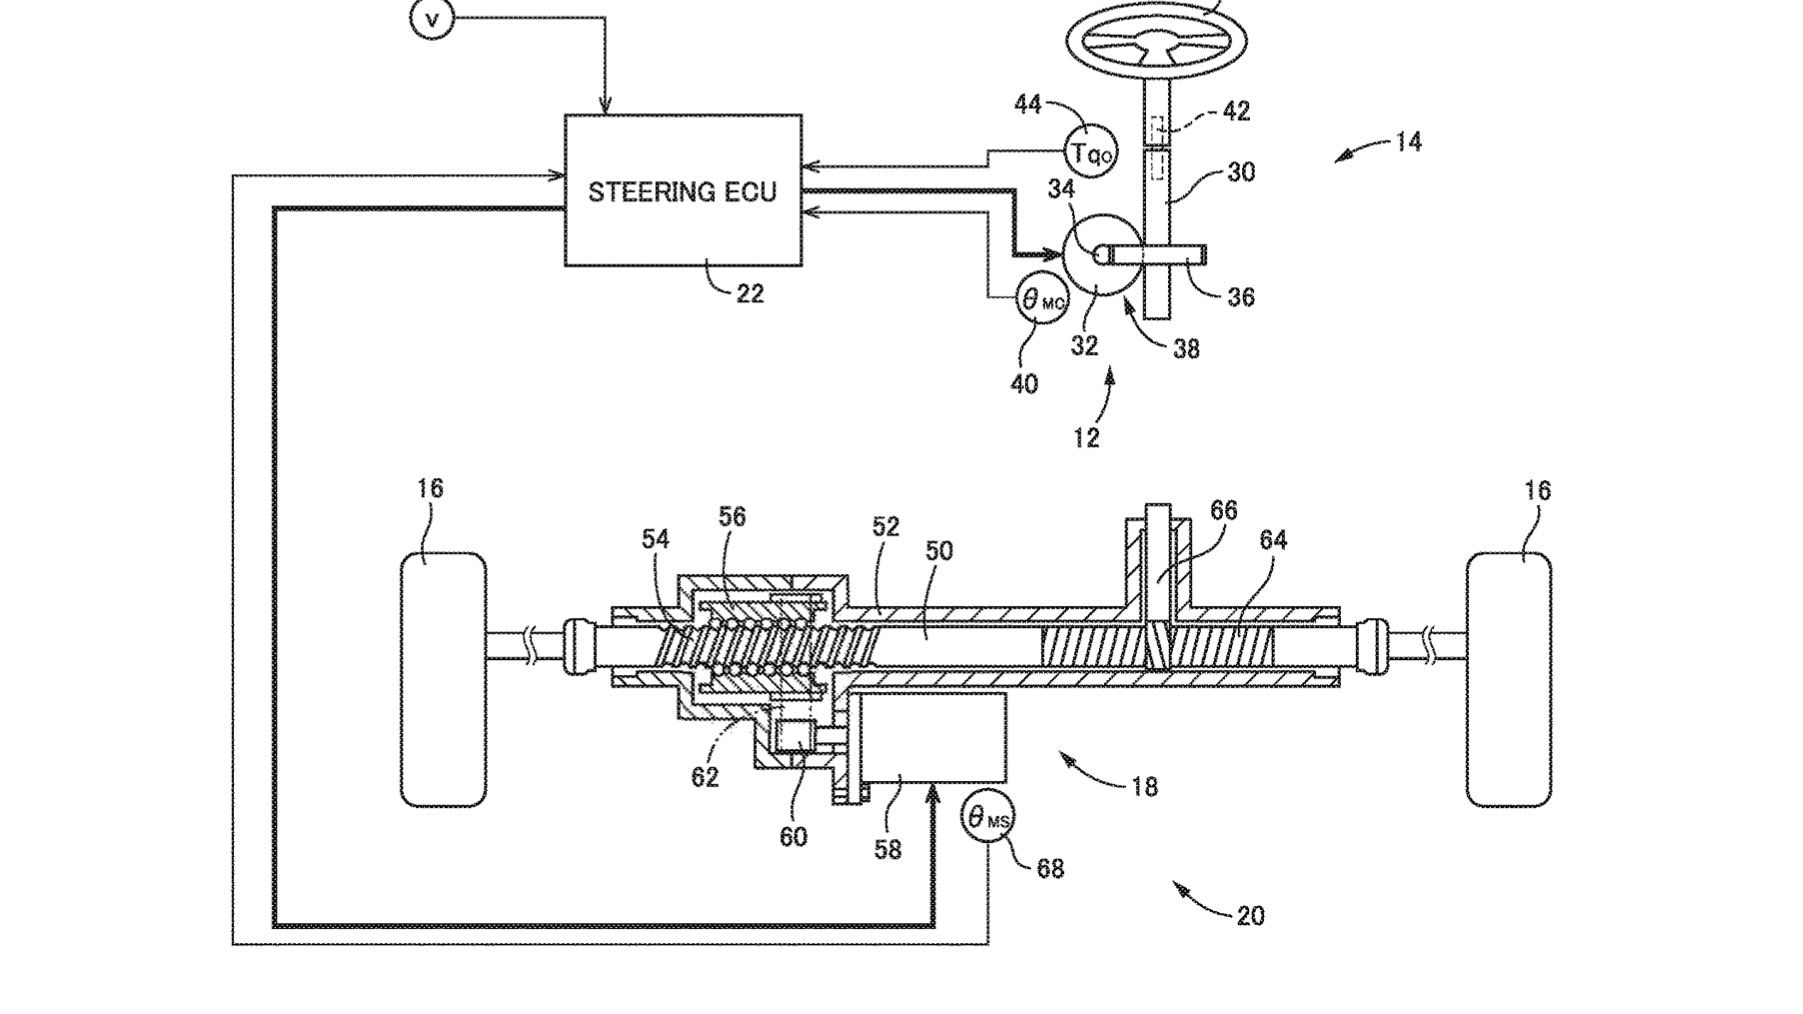 Toyota steer-by-wire system U.S. patent image